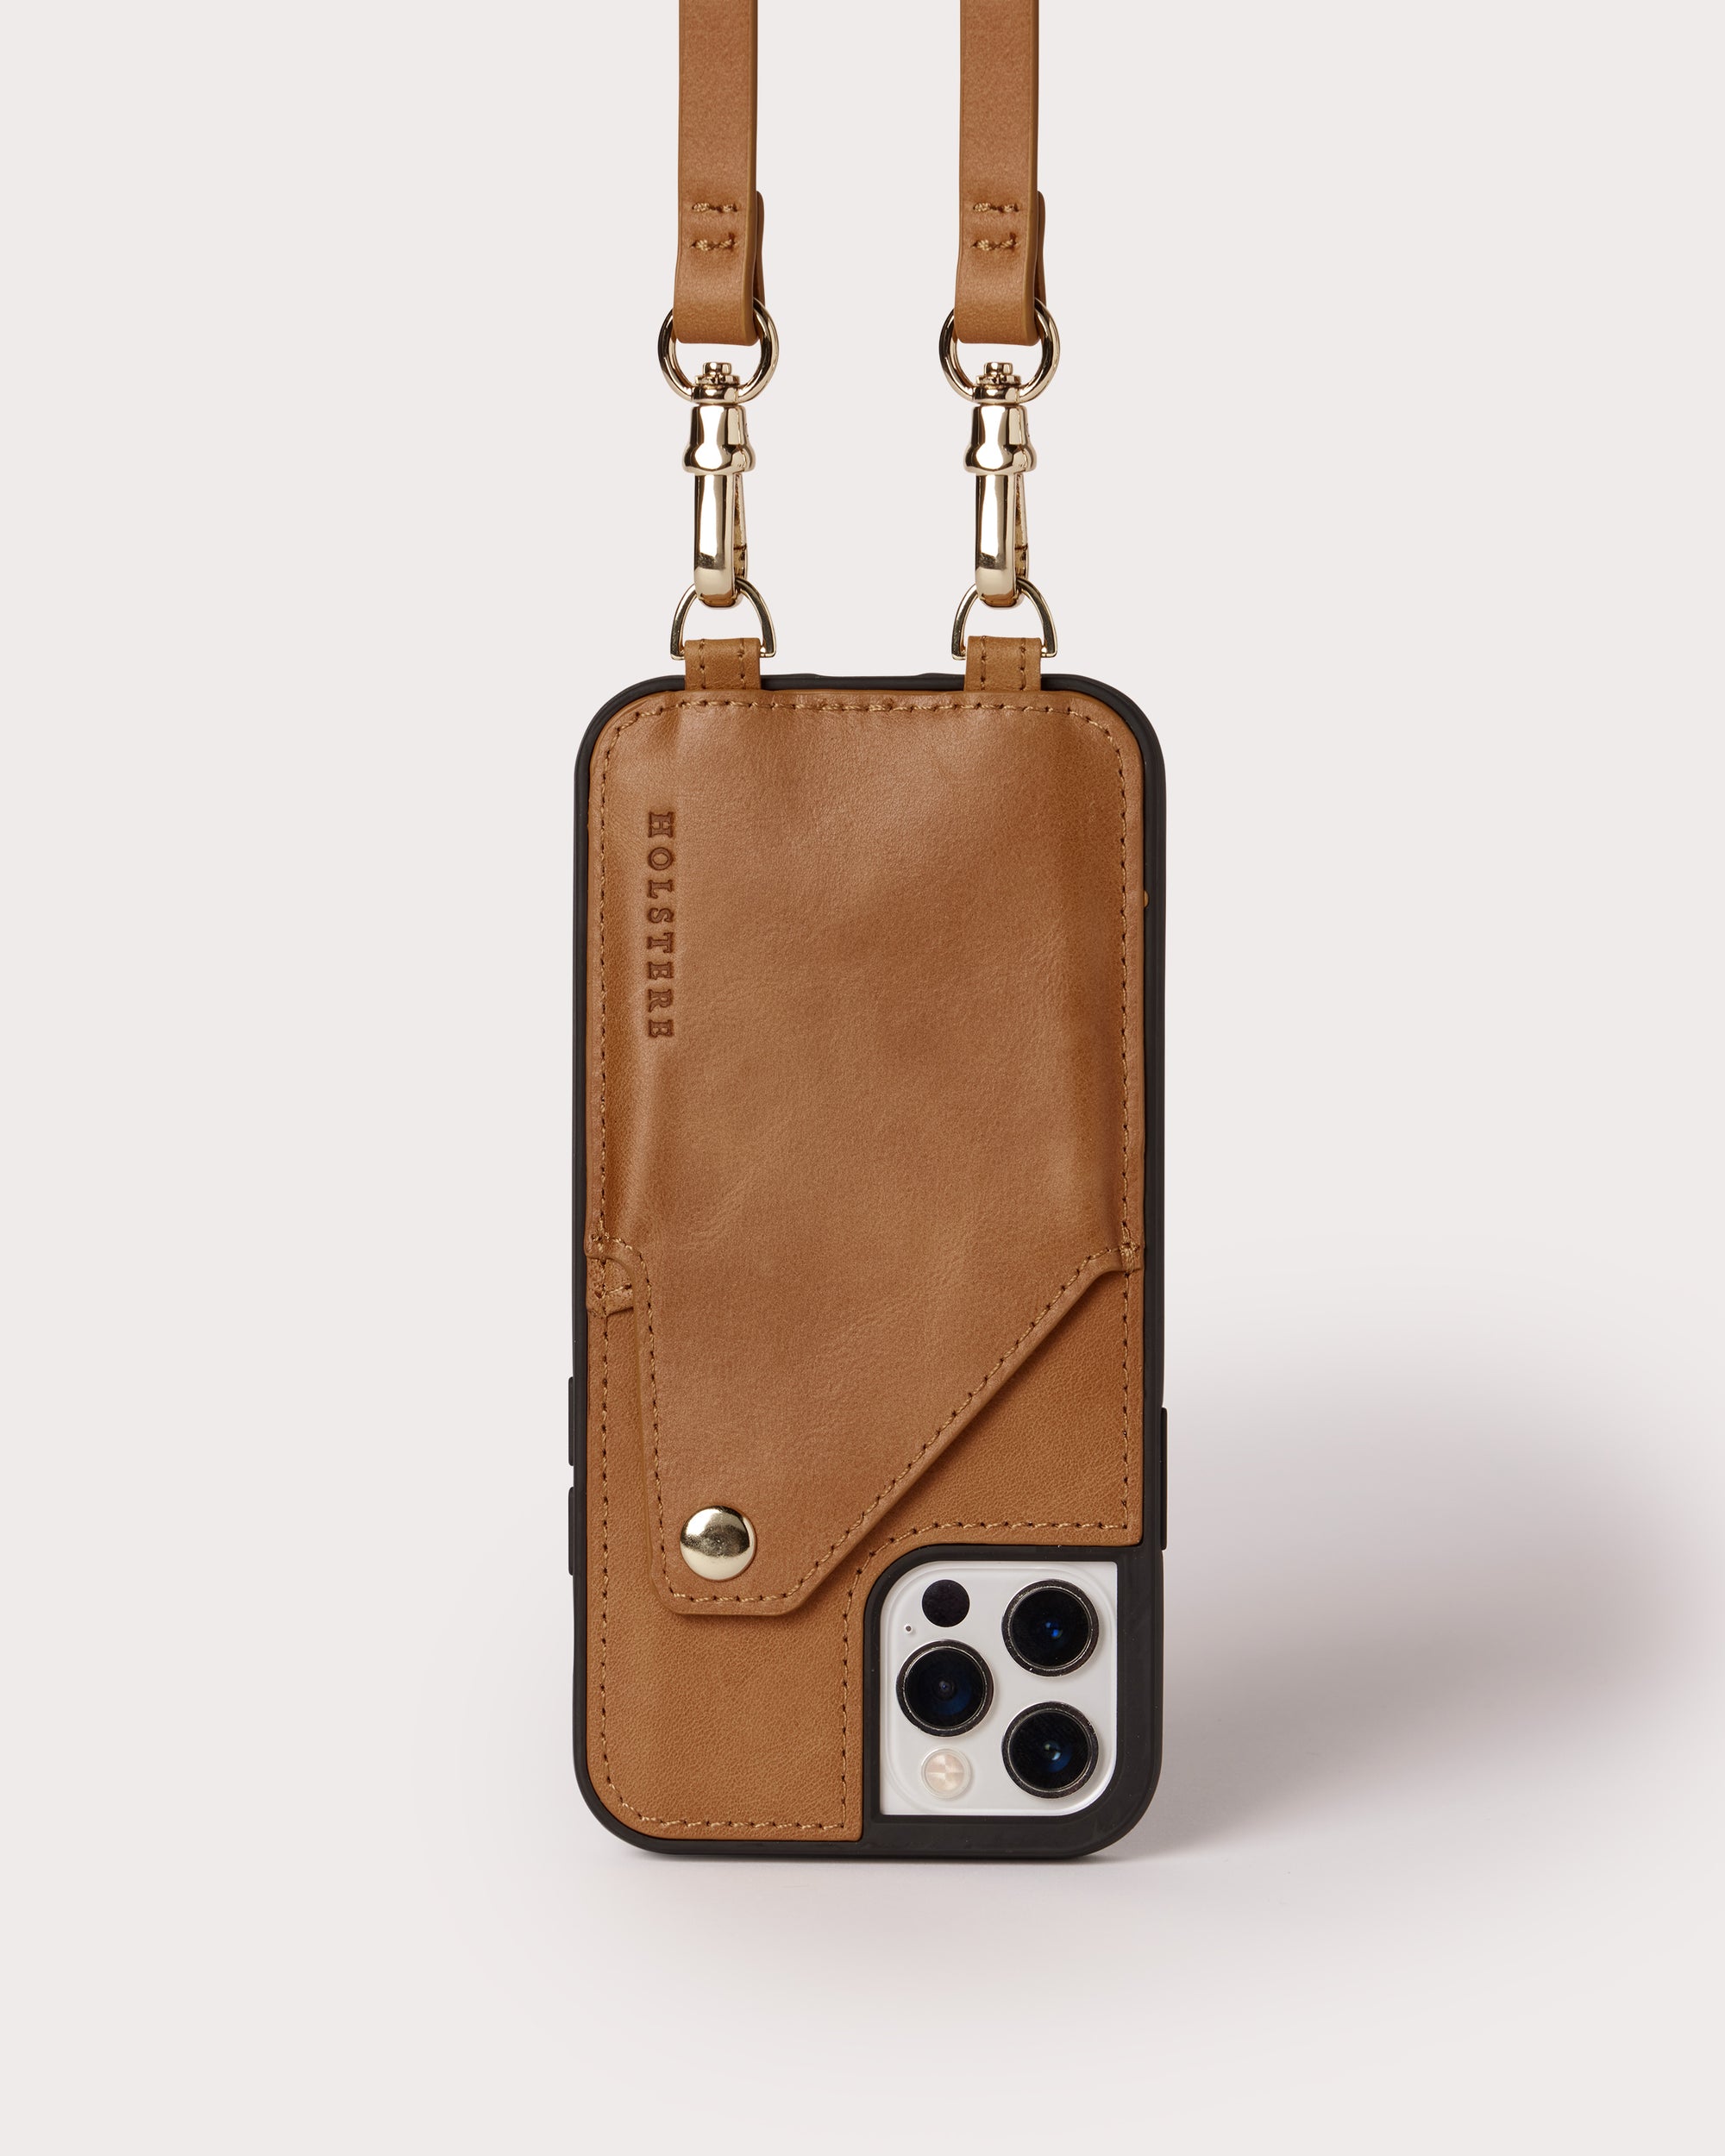 Luxury Crossbody Removable Leather Case For iPhone 14 Pro Max 12